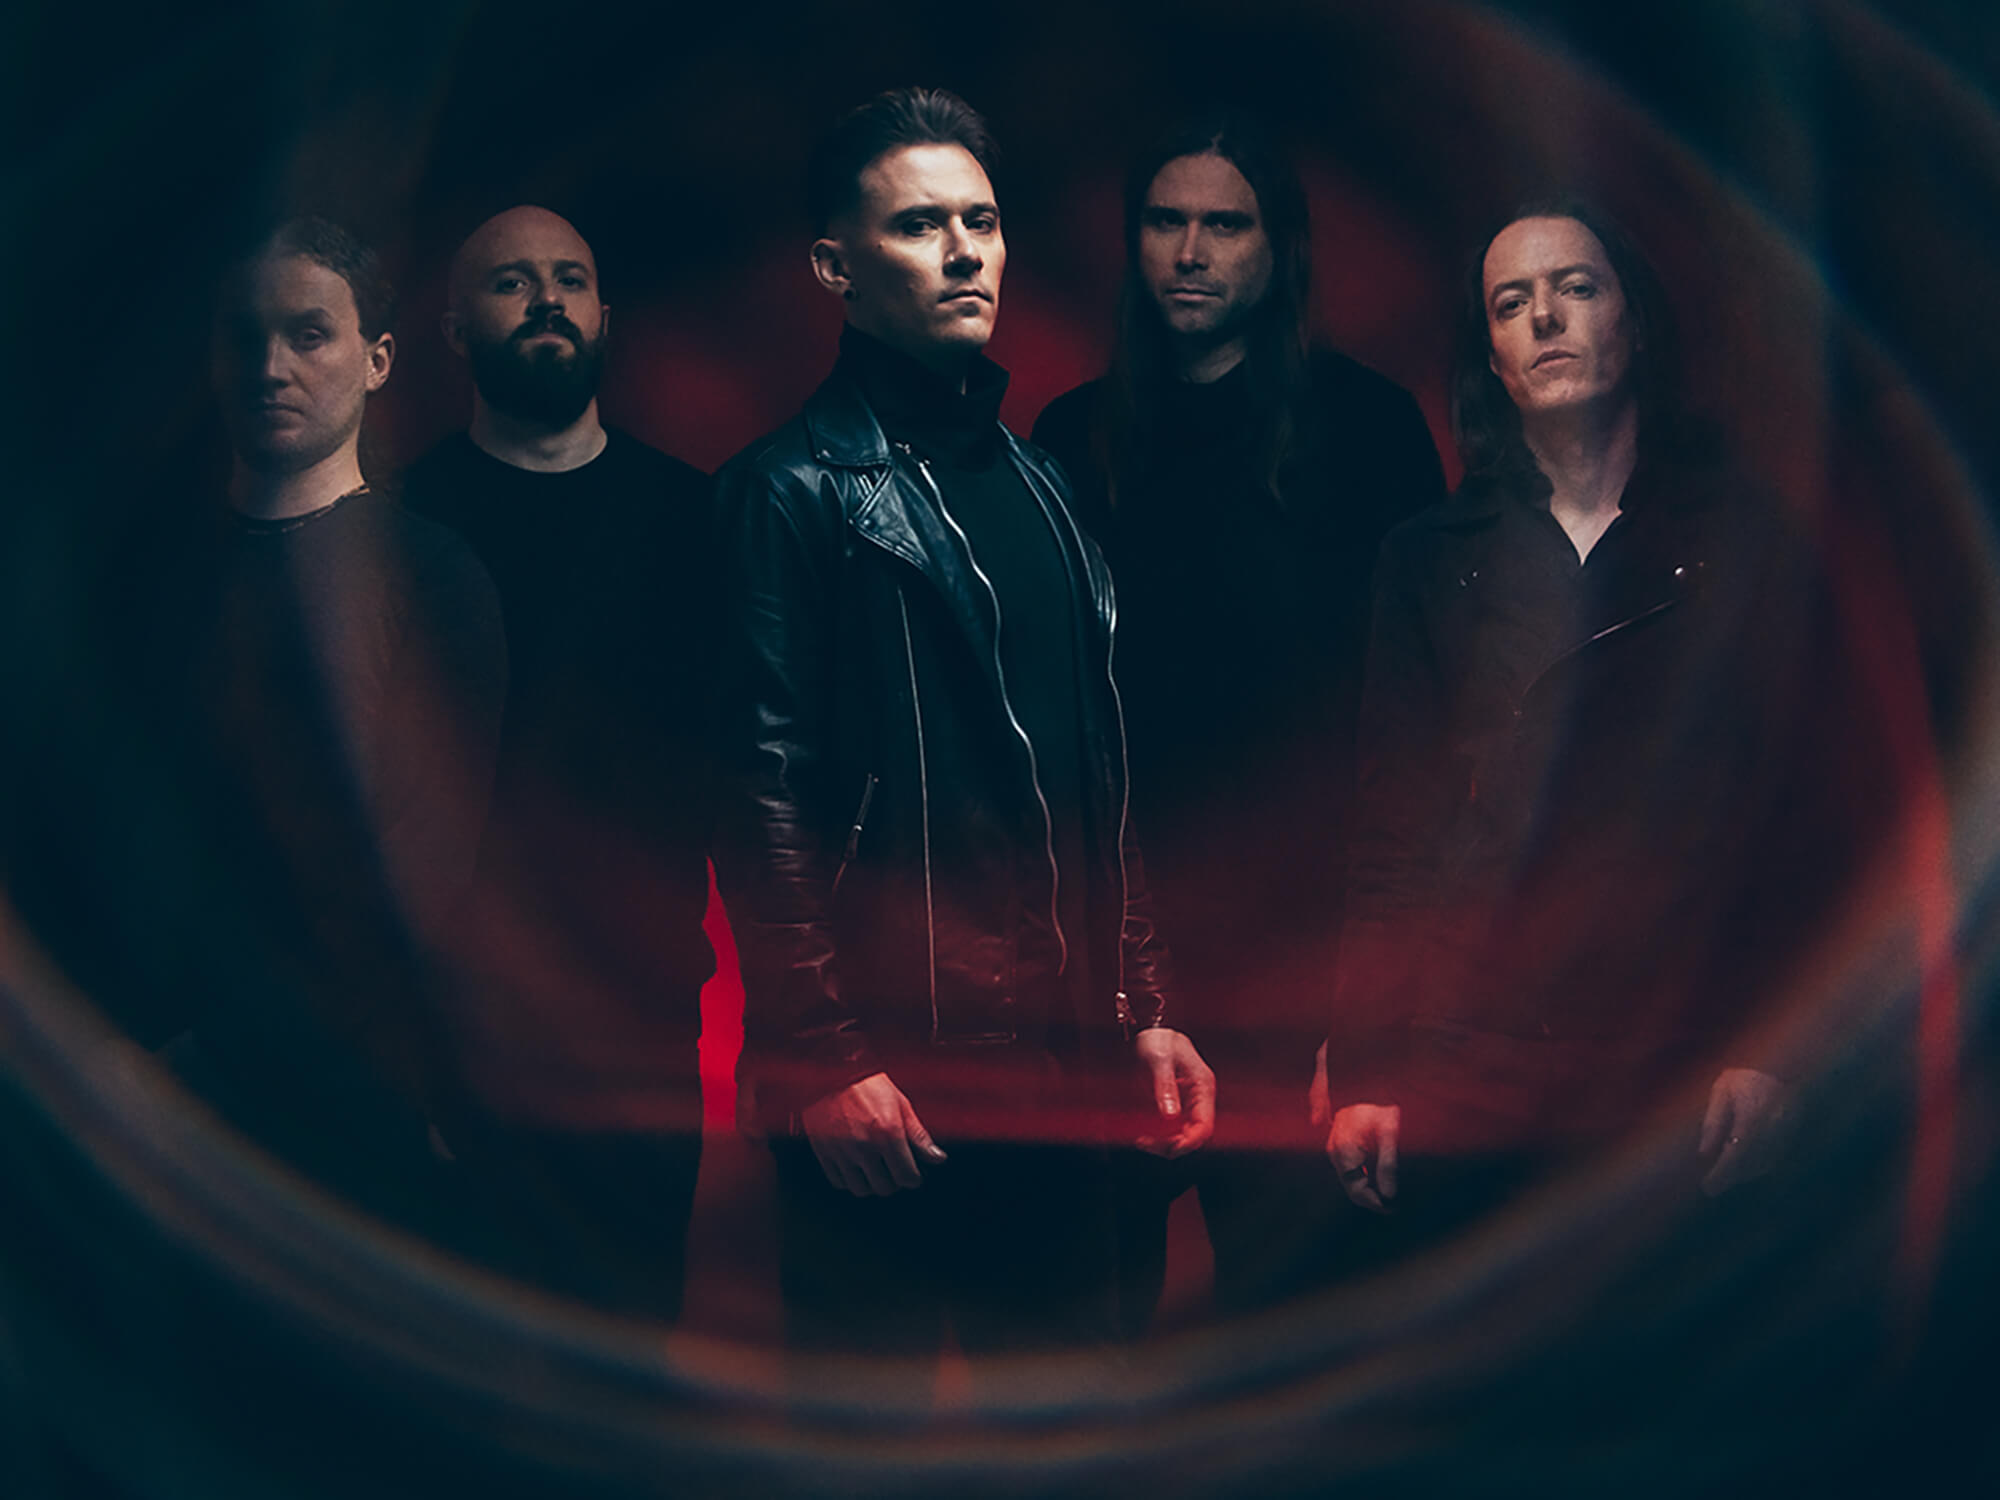 Tesseract photographed by Andy Ford